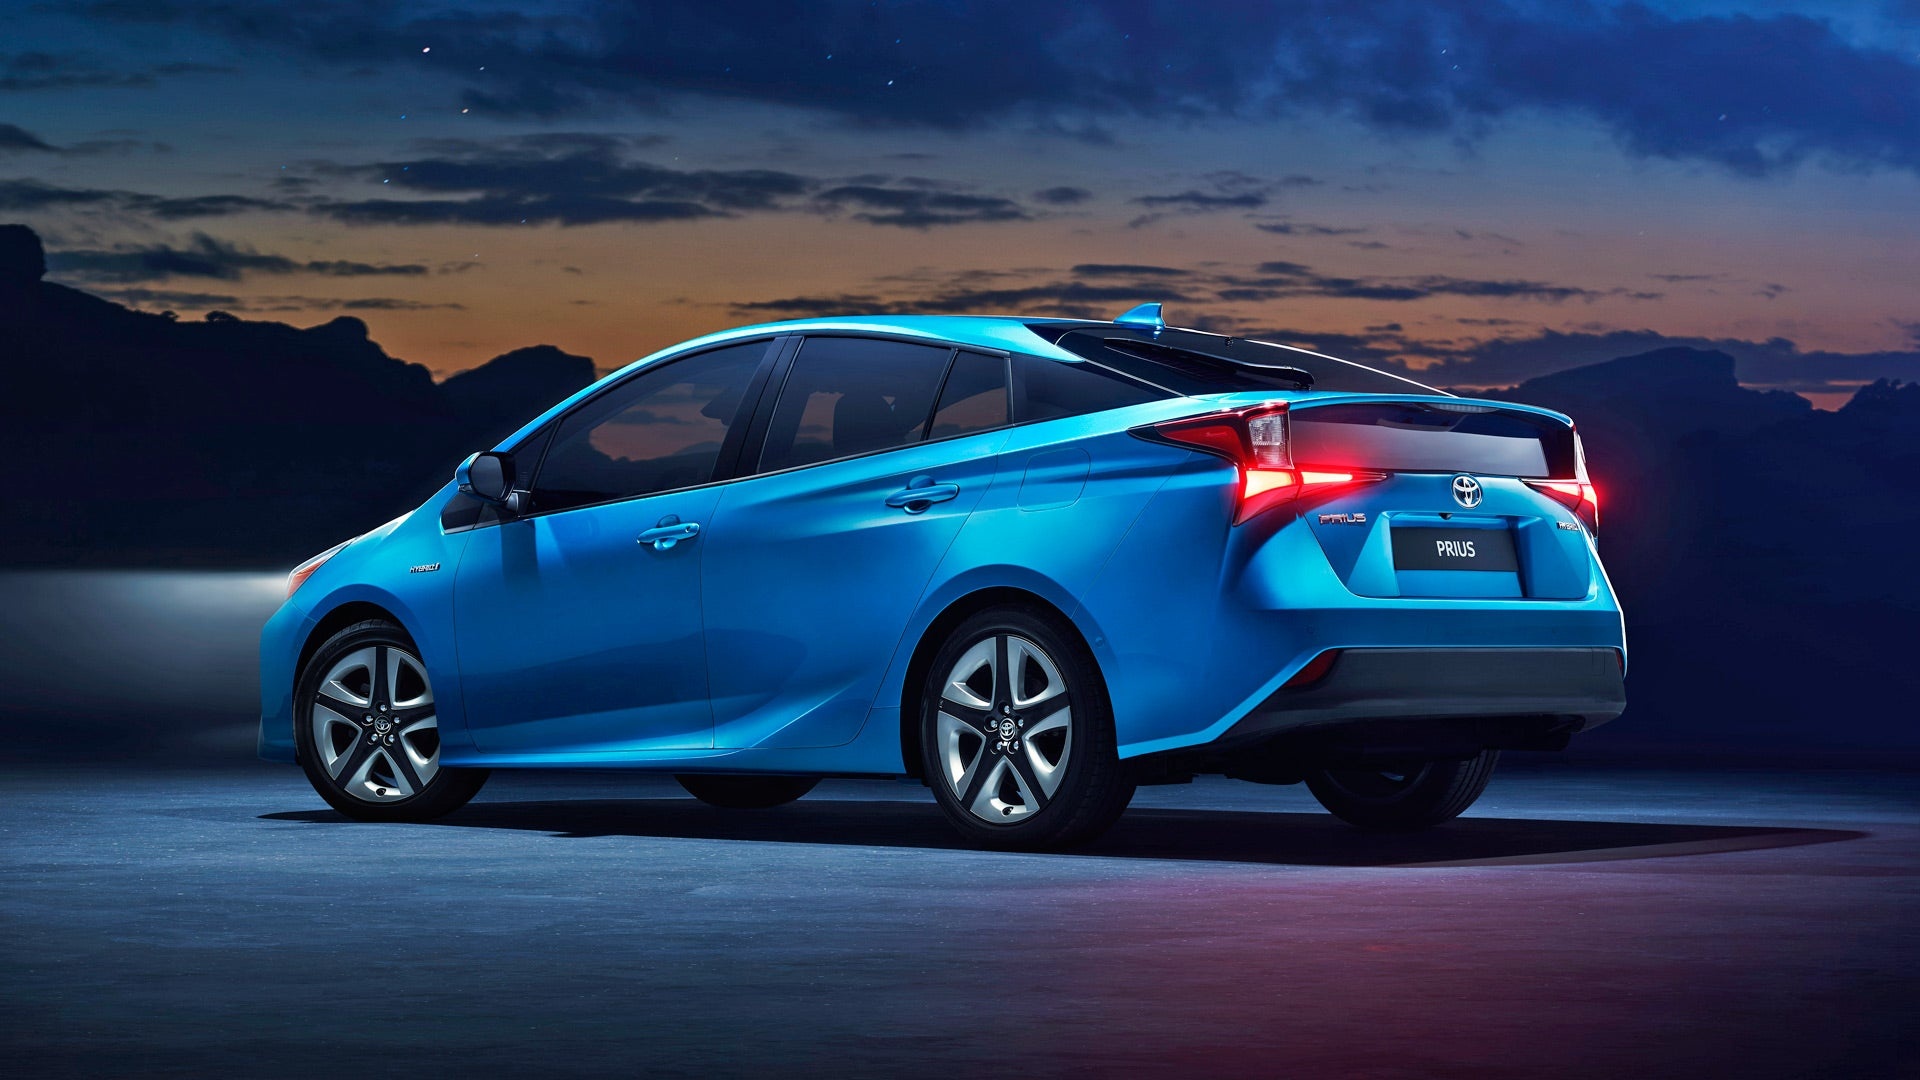 Toyota Prius, All-weather capability, Sleek and stylish, Enhanced safety features, 1920x1080 Full HD Desktop